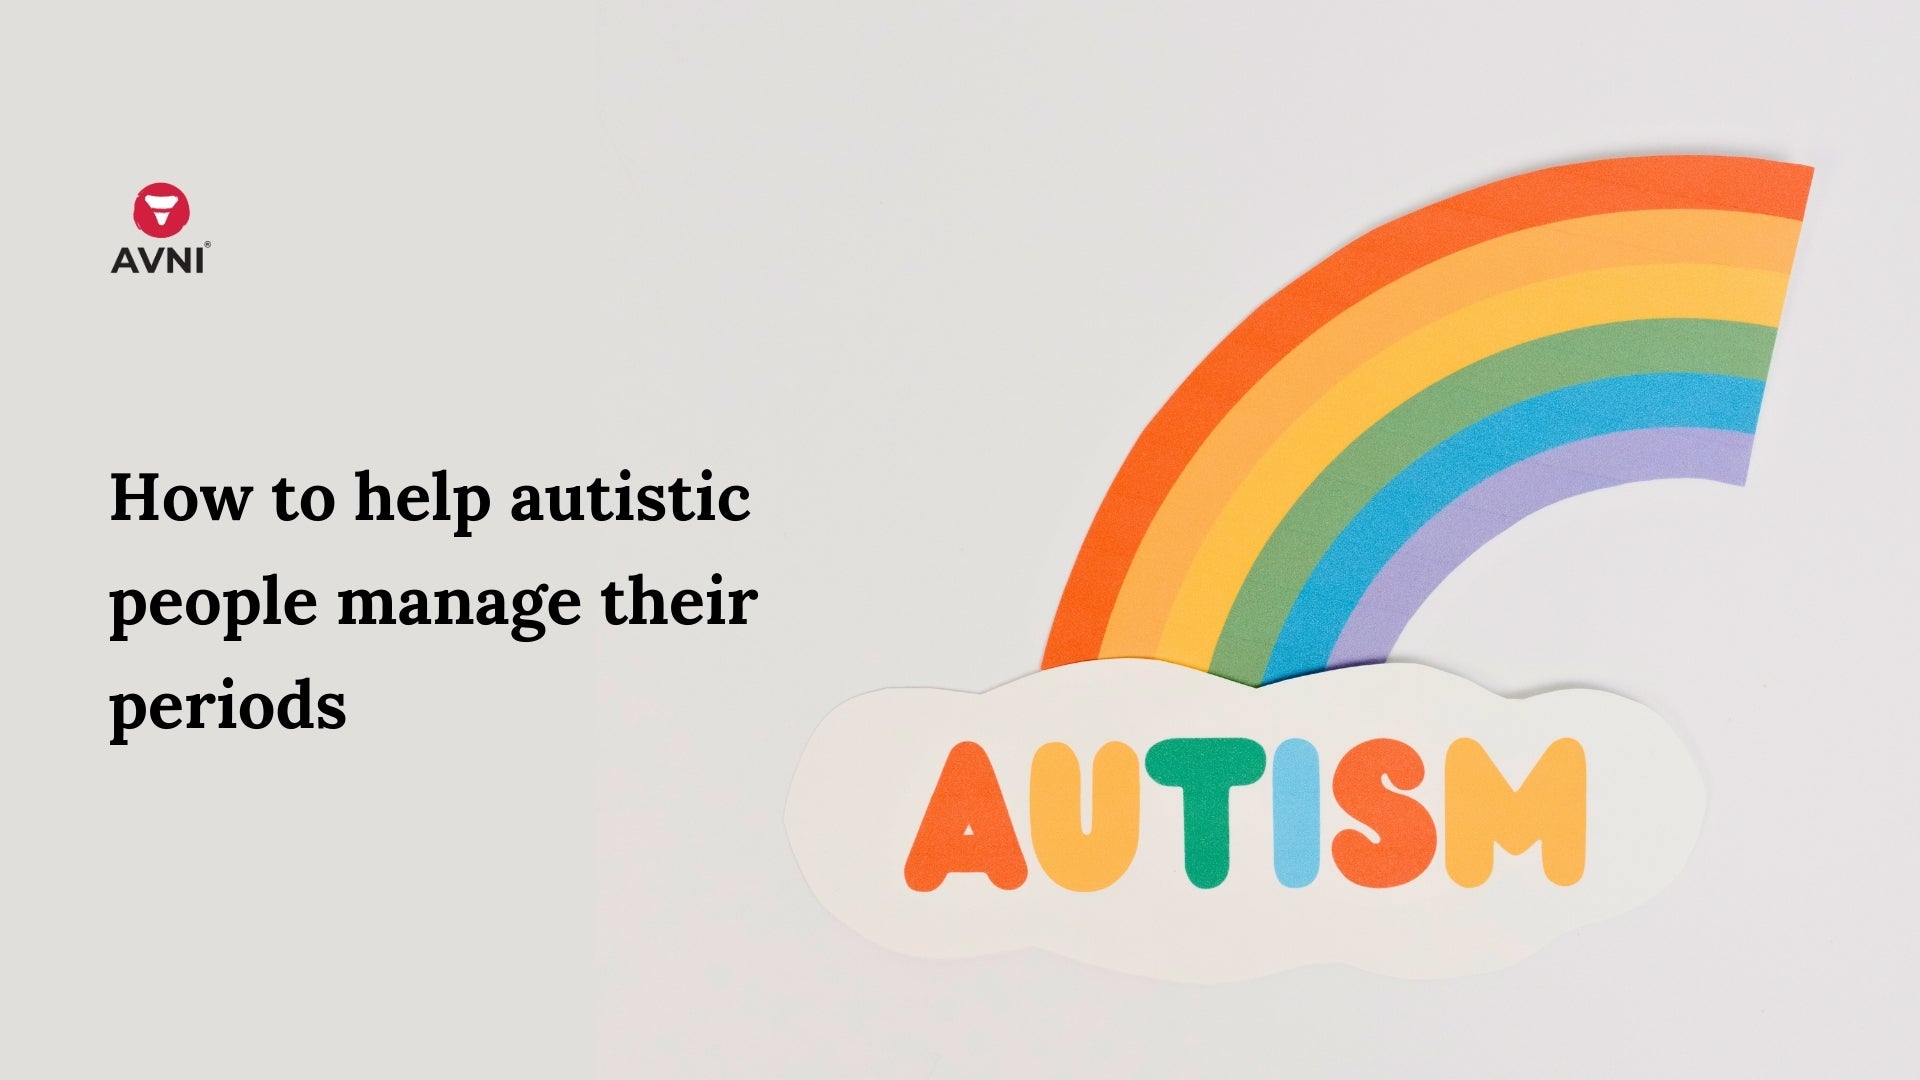 How to help autistic people manage their periods